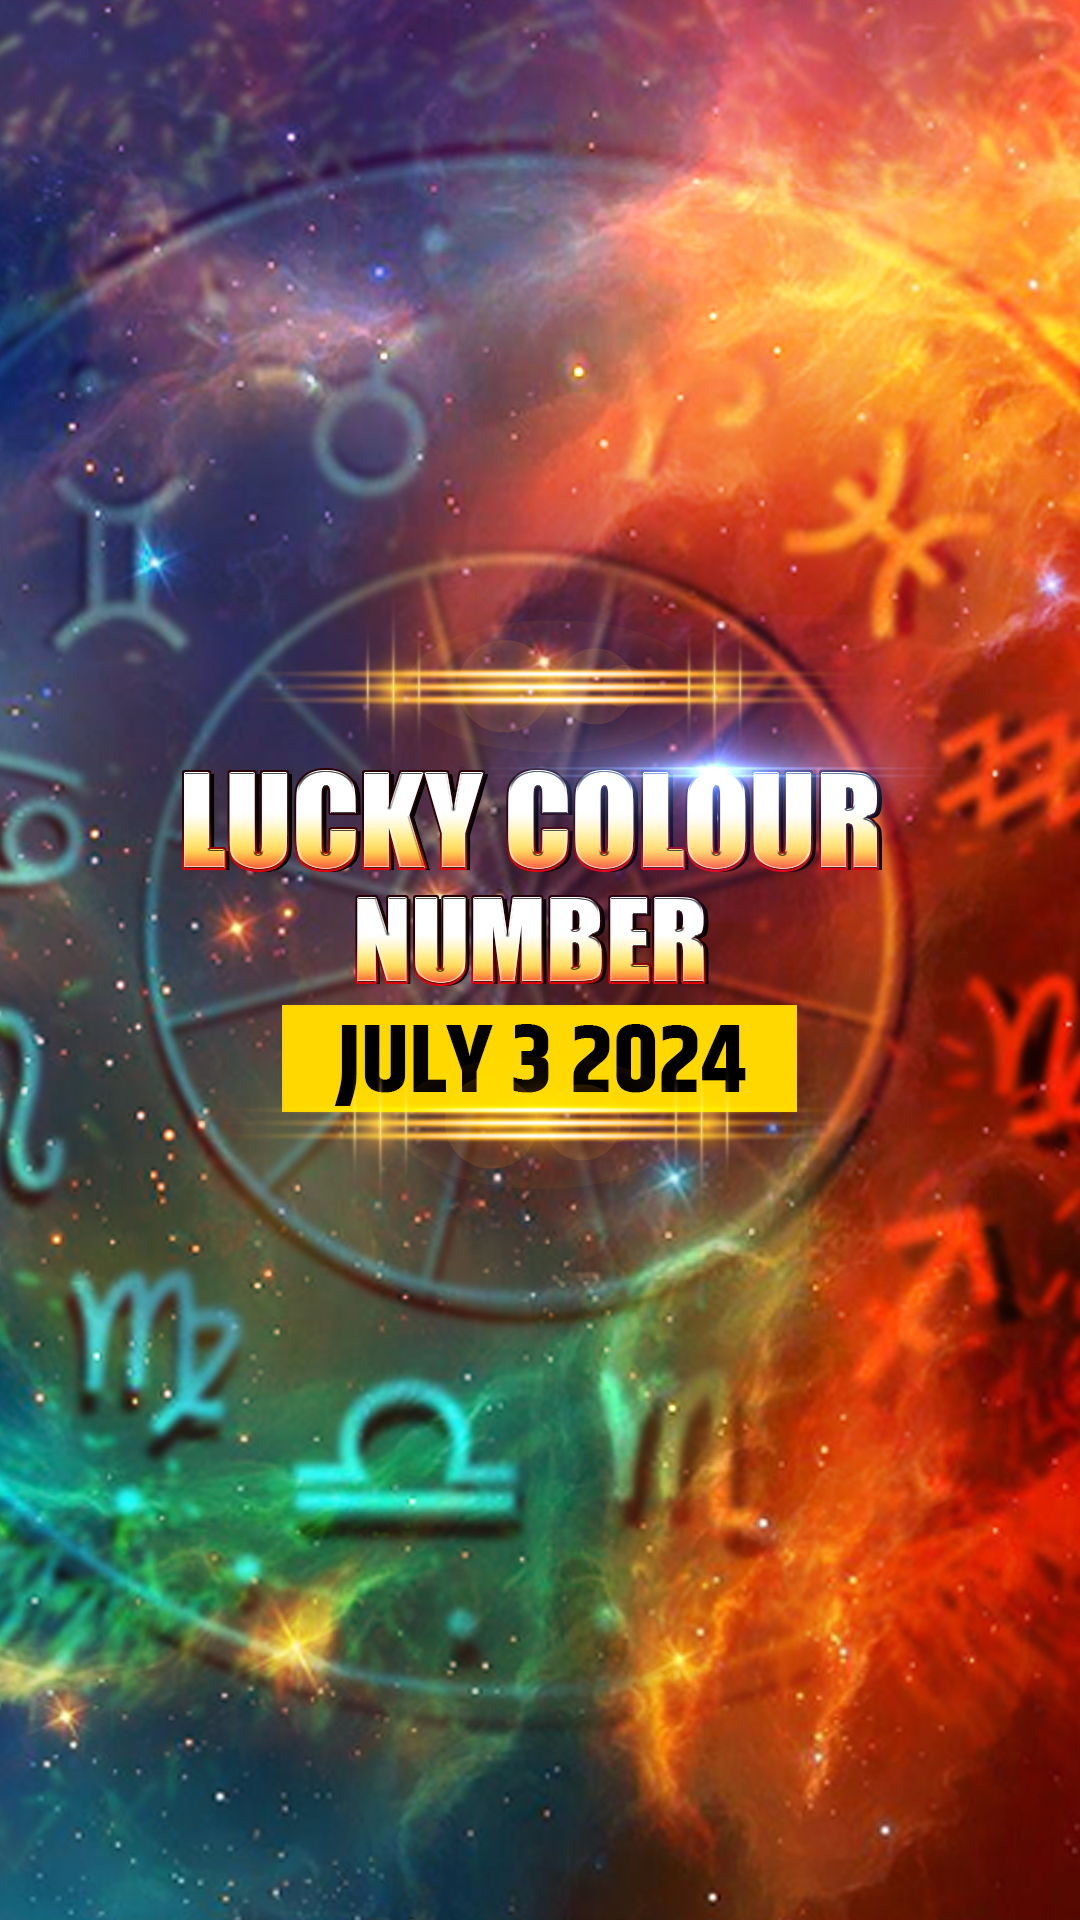 Know lucky colour, number of all zodiac signs in horoscope for July 3, 2024